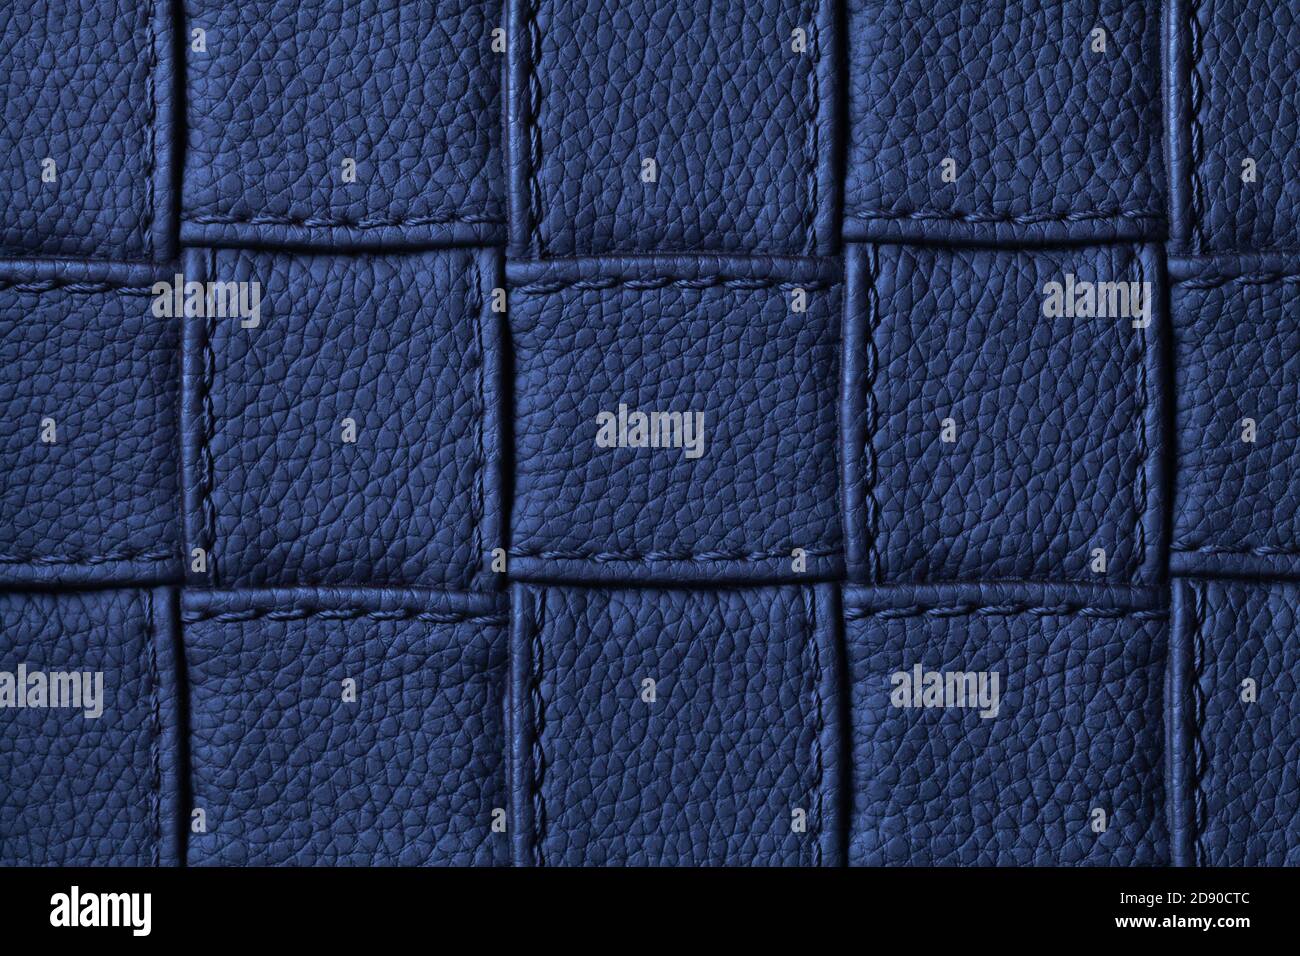 Navy Leather  Leather texture seamless, Leather texture, Blue leather